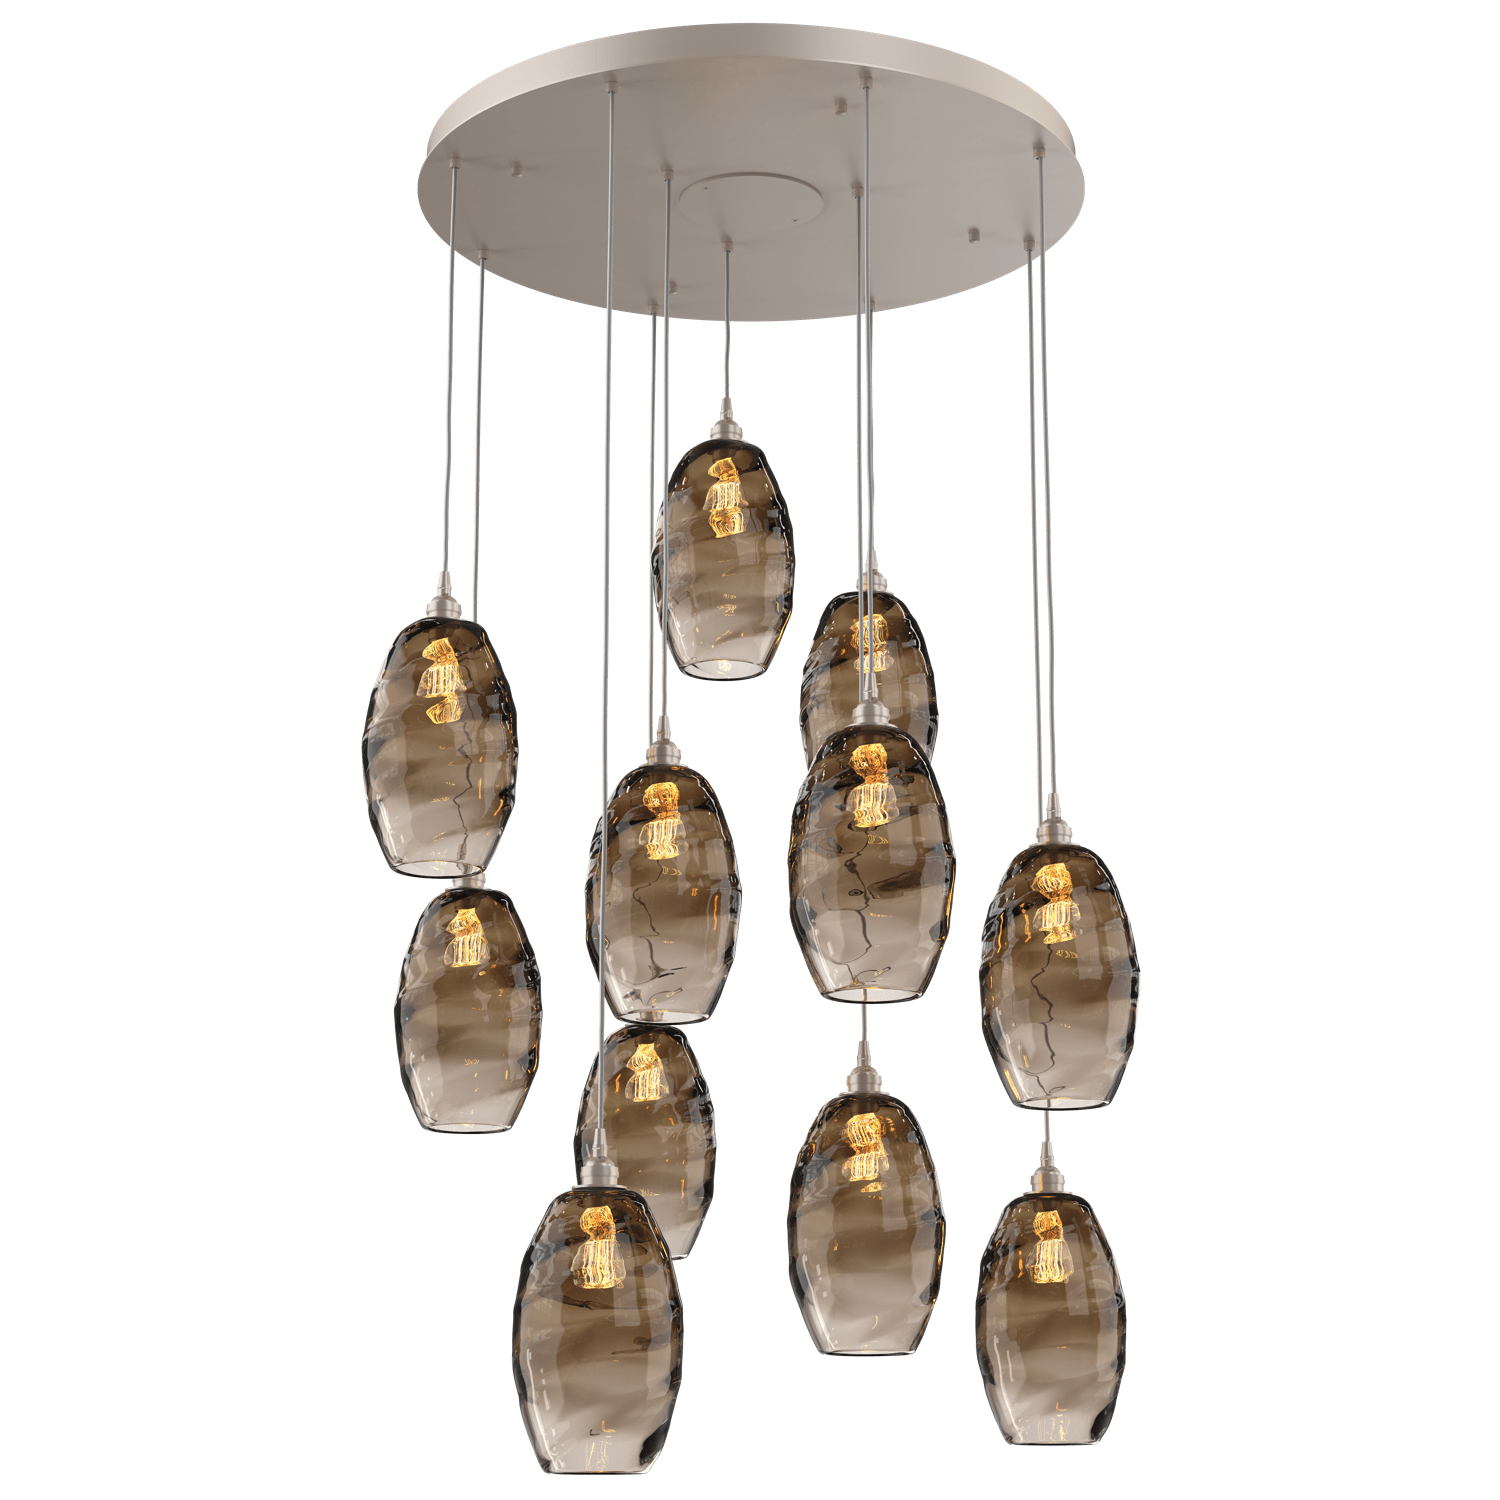 CHB0035-11-BS-OB-Hammerton-Studio-Optic-Blown-Glass-Elisse-11-light-round-pendant-chandelier-with-metallic-beige-silver-finish-and-optic-bronze-blown-glass-shades-and-incandescent-lamping